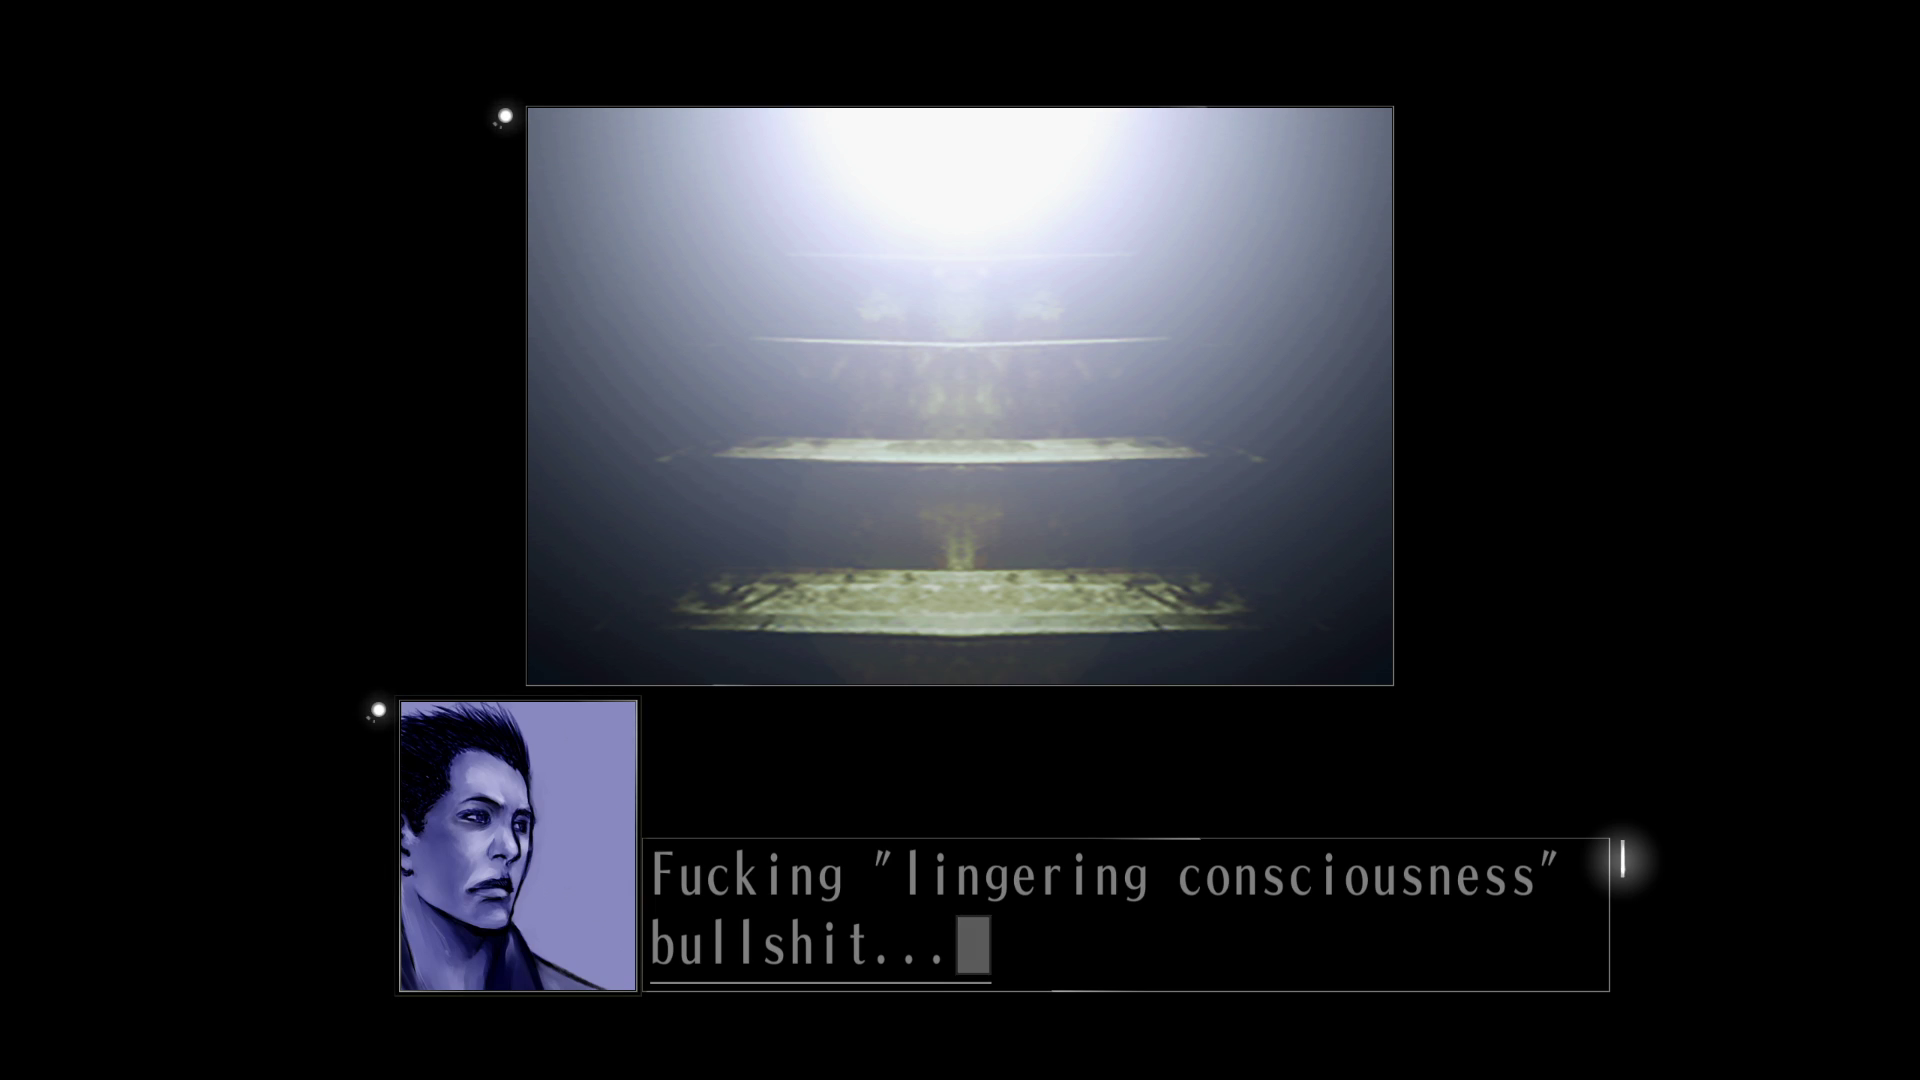 Screenshot from "HIKARI." A central window shows a stairway rising into bright light. Tokio says, "Fucking 'lingering consciousness' bullshit..."